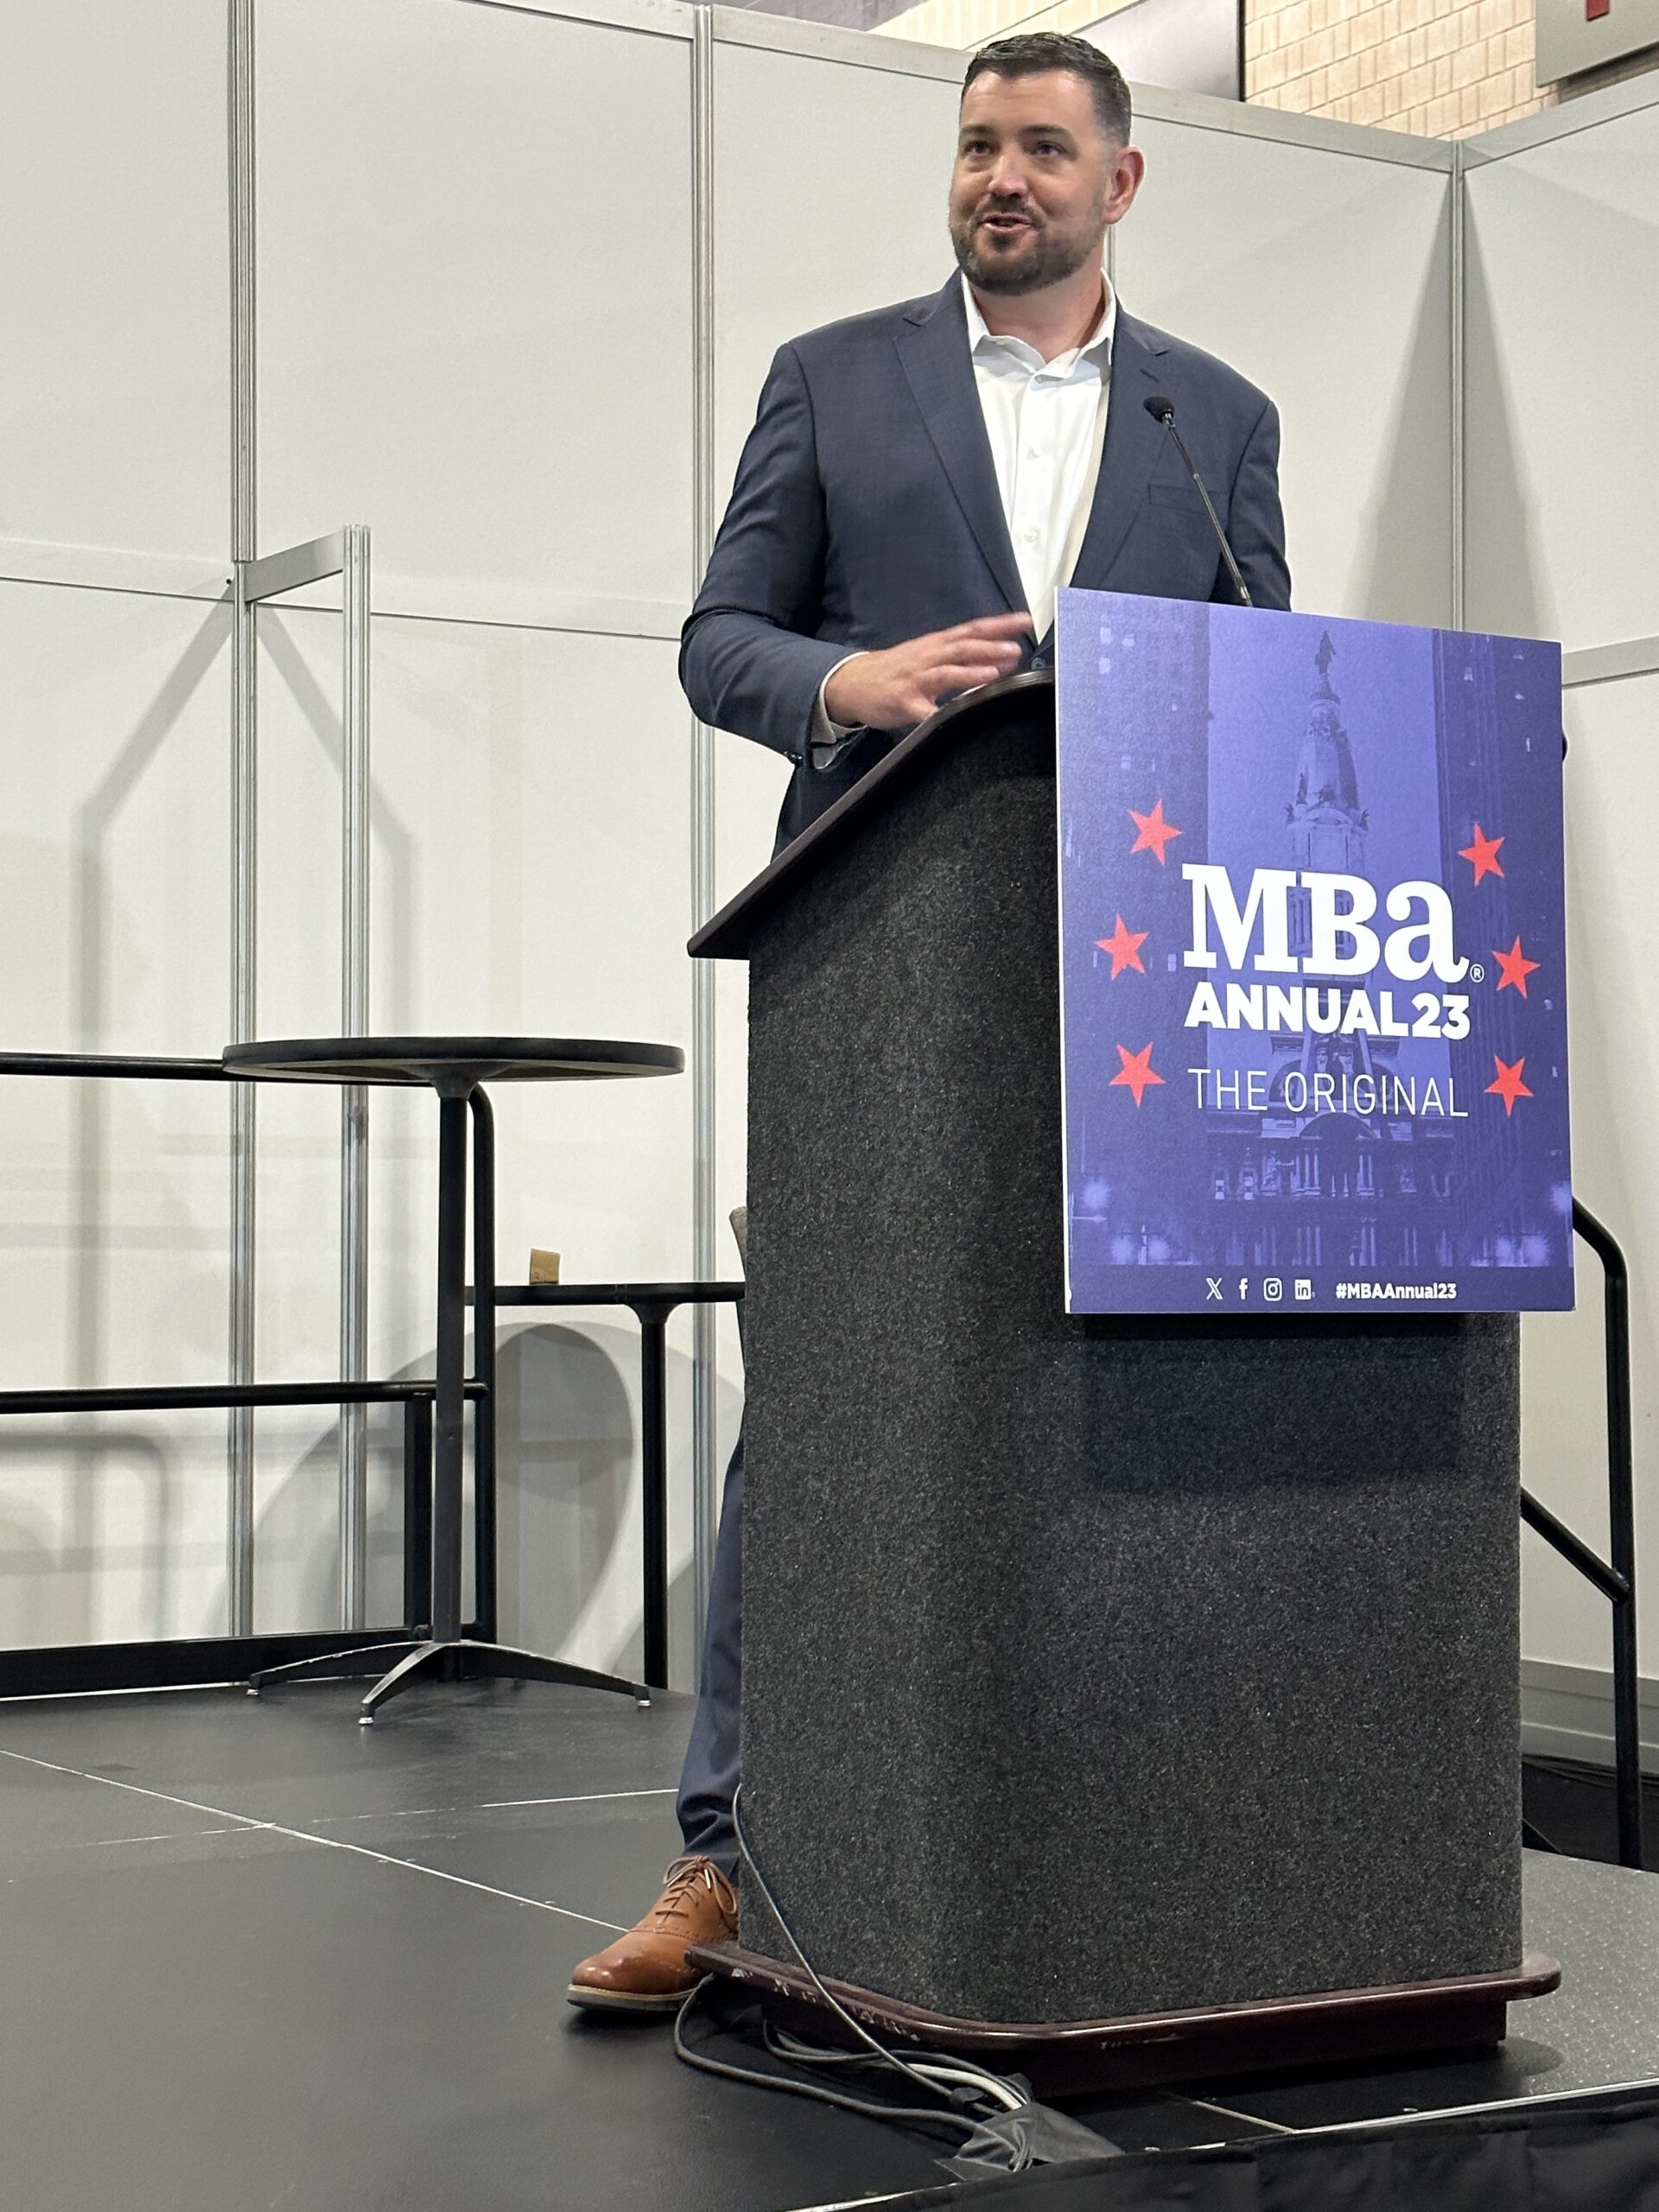 HouseCanary Chris Rediger at Mortgage Technology Showcase, MBA Annual 2023 - The Basis Point